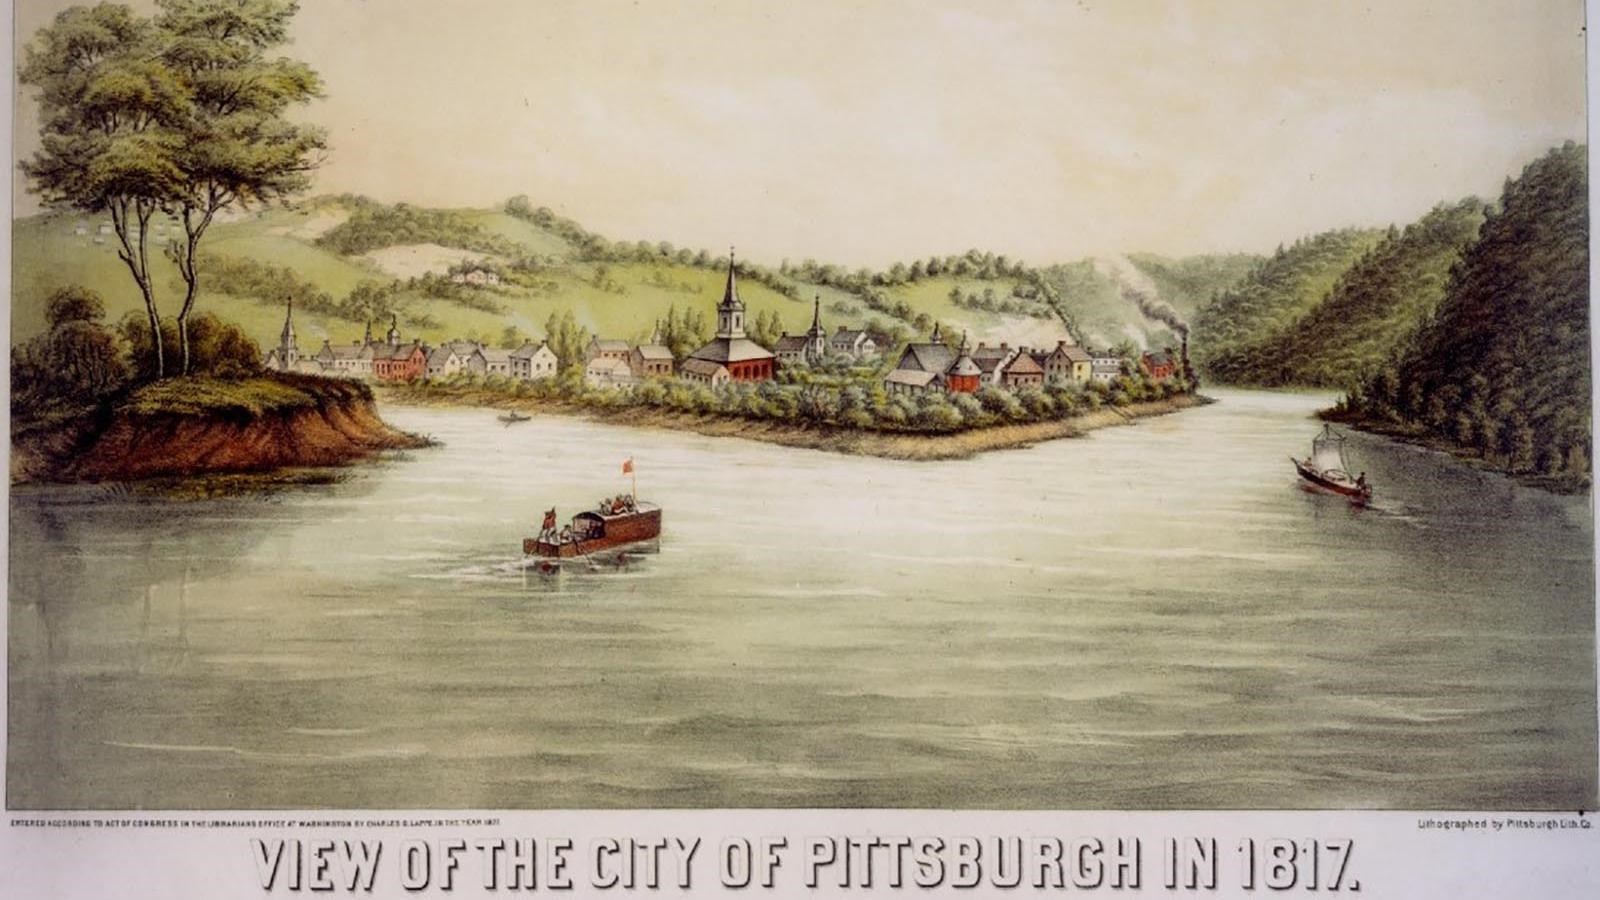 Drawing of the city of Pittsburgh from 1817.